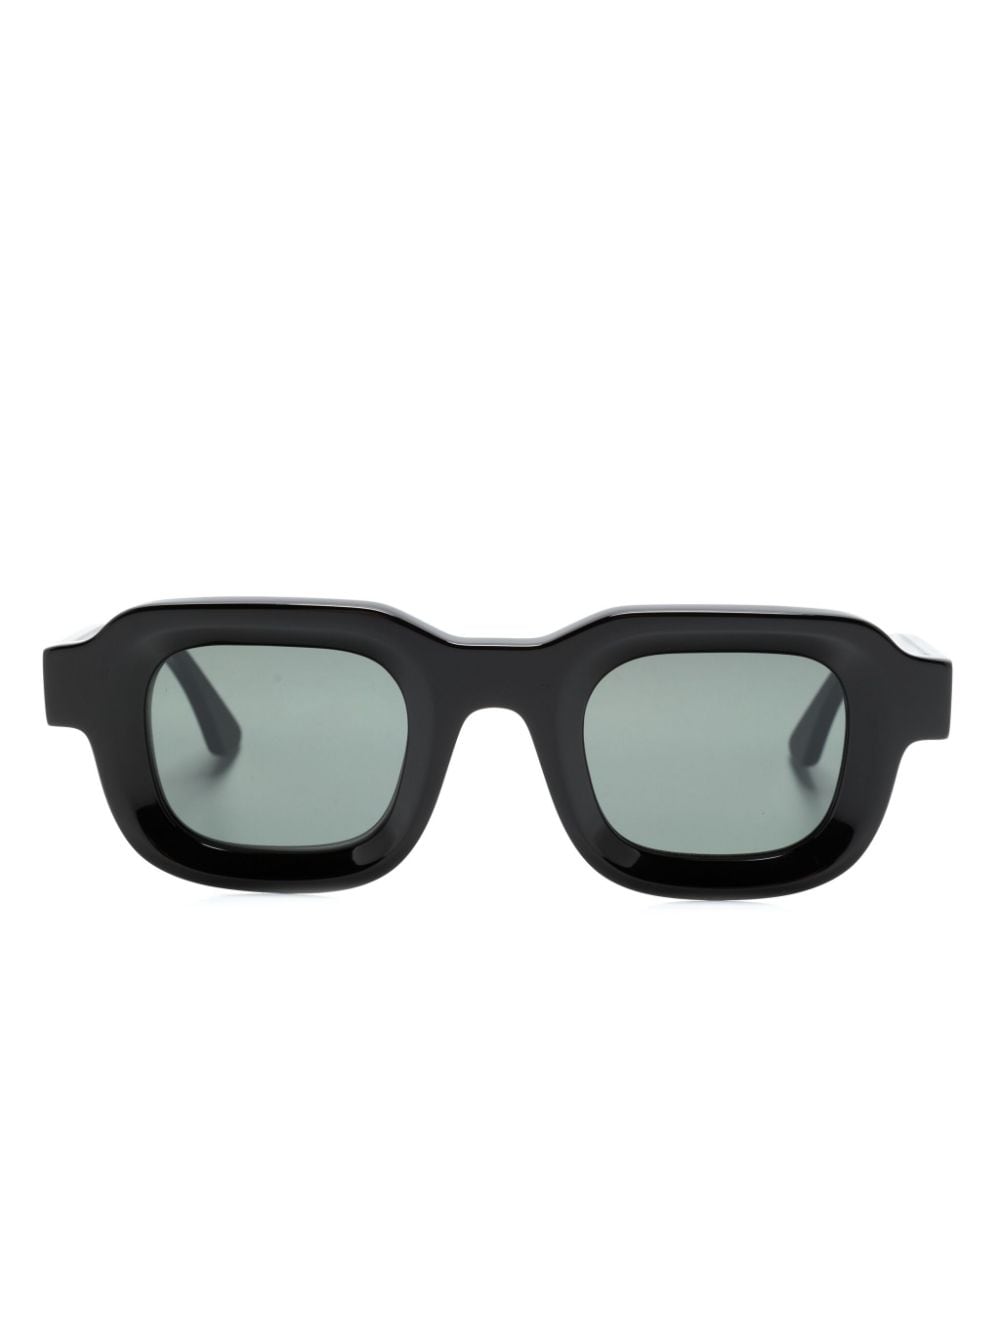 Thierry Lasry Narcoty square-frame sunglasses - Black von Thierry Lasry